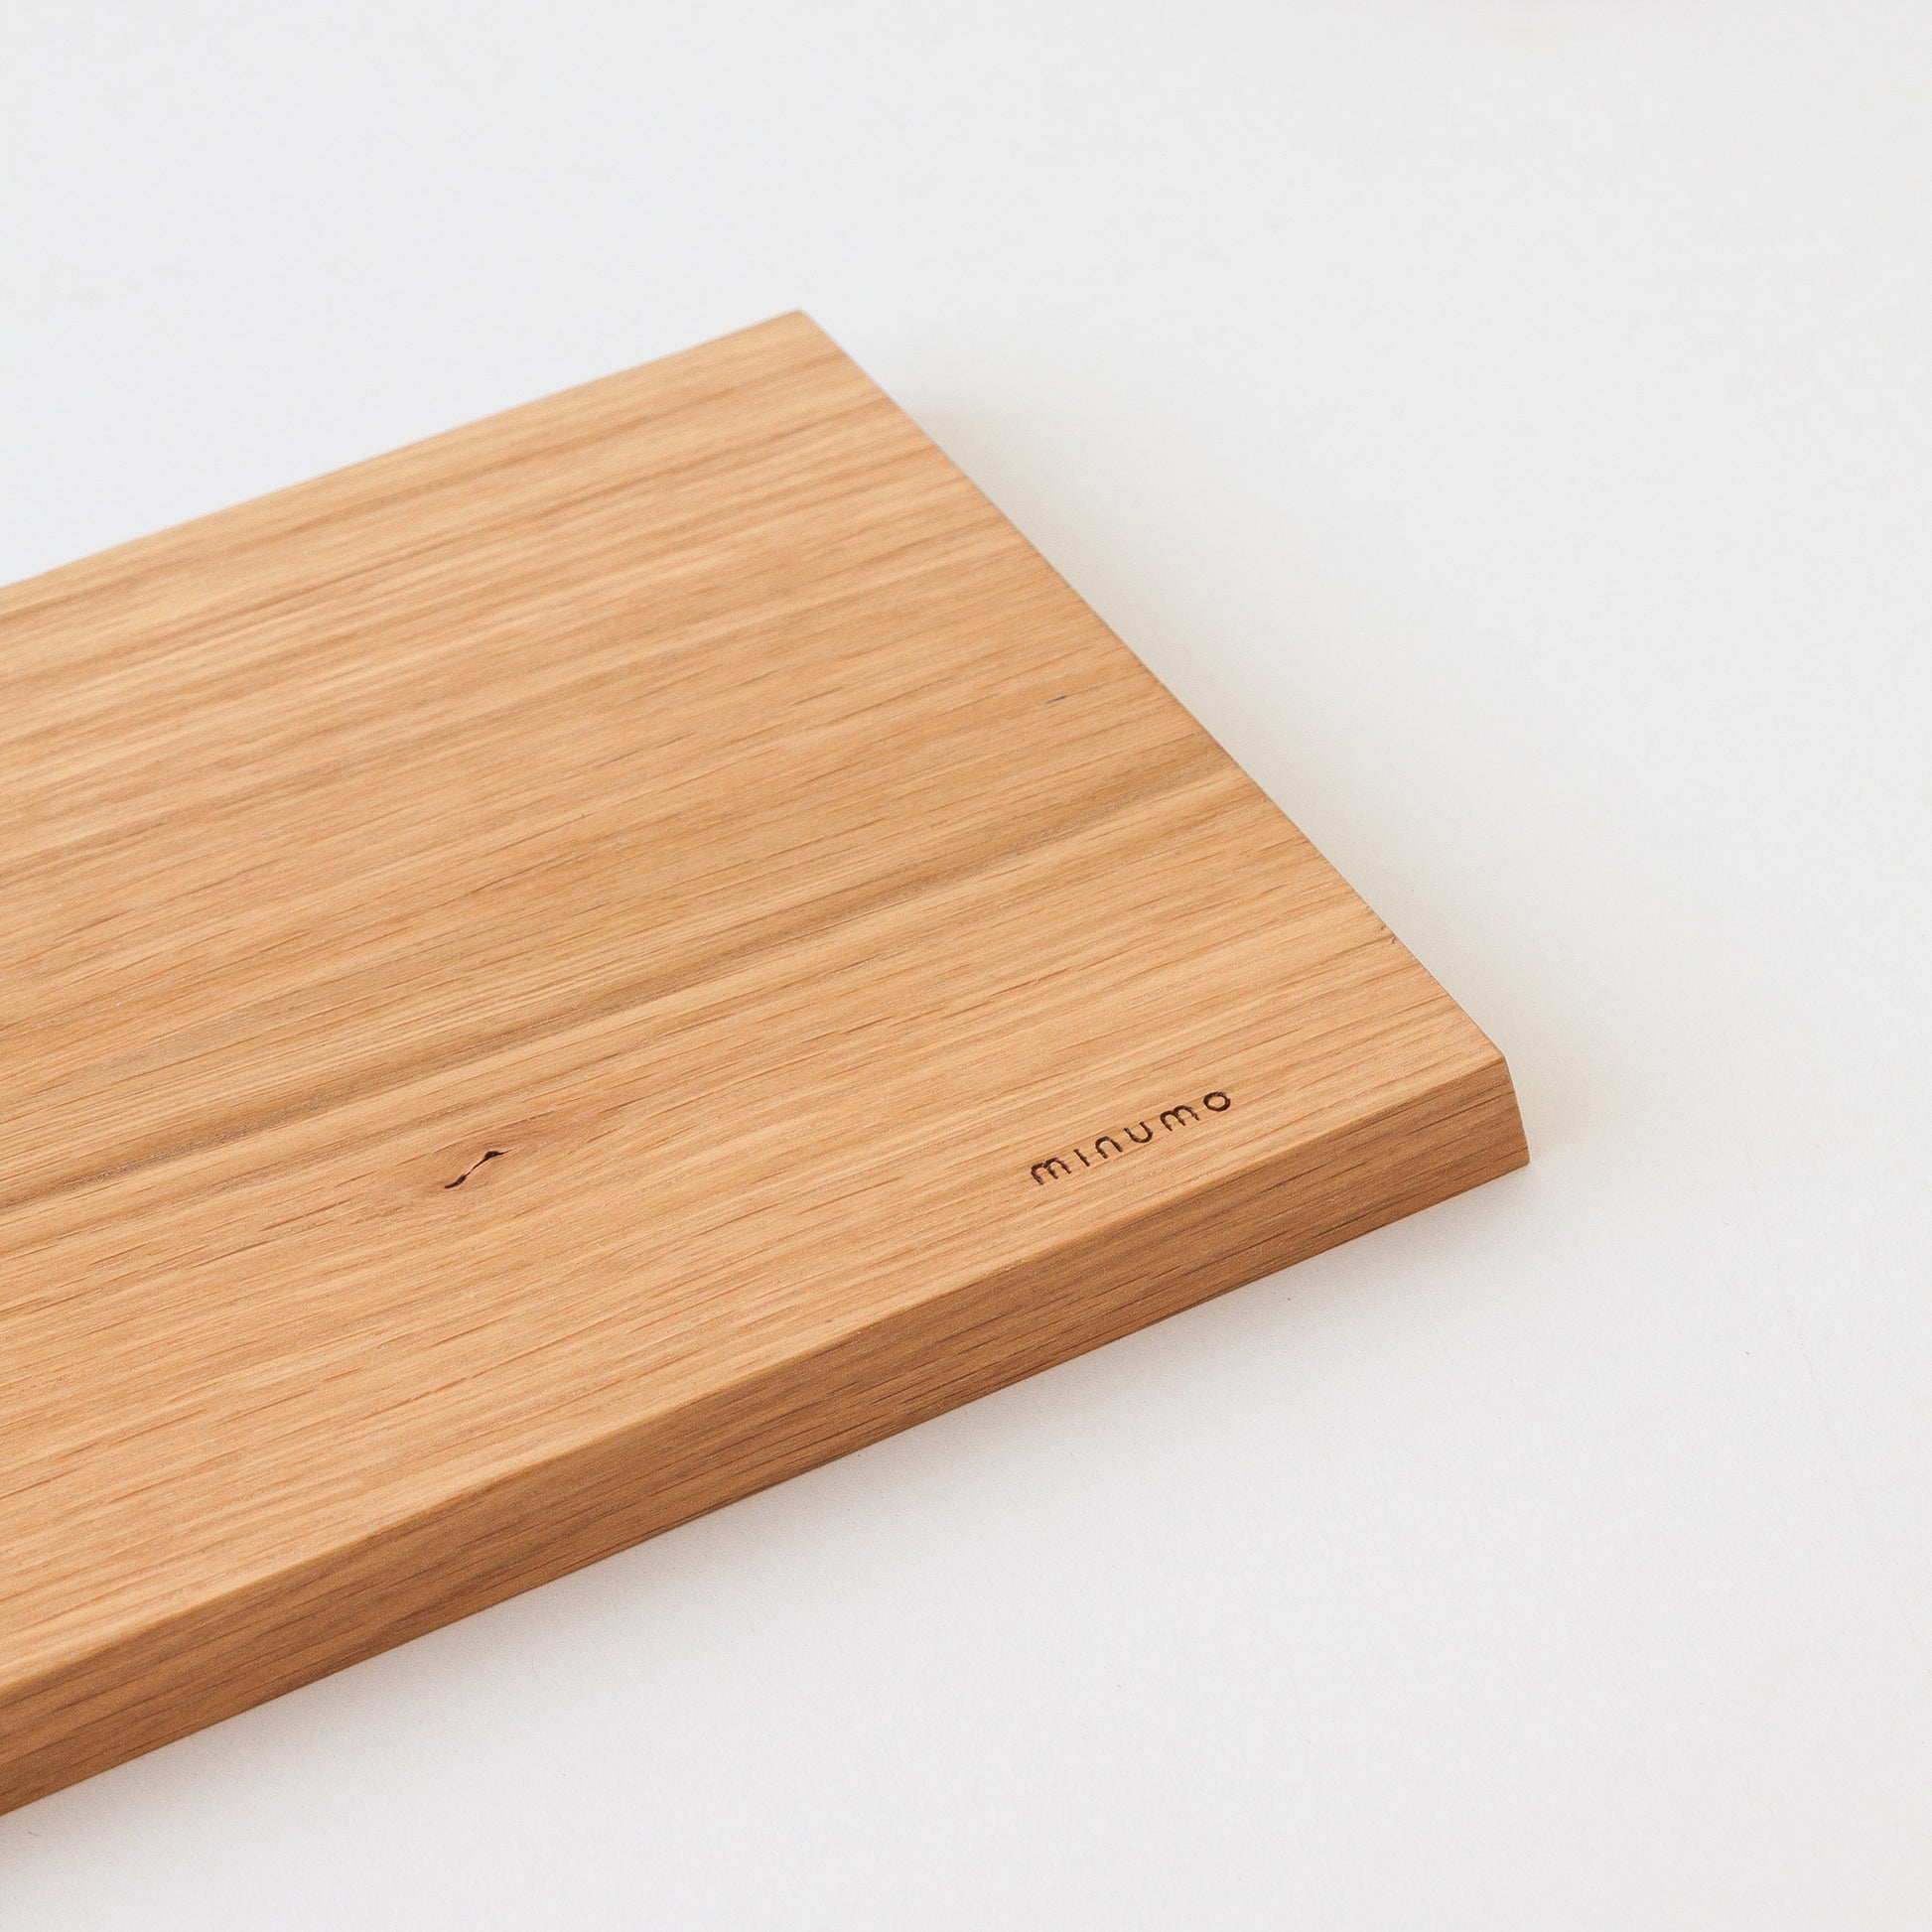 Minumo cutting and serving boards logo in minimal modern design